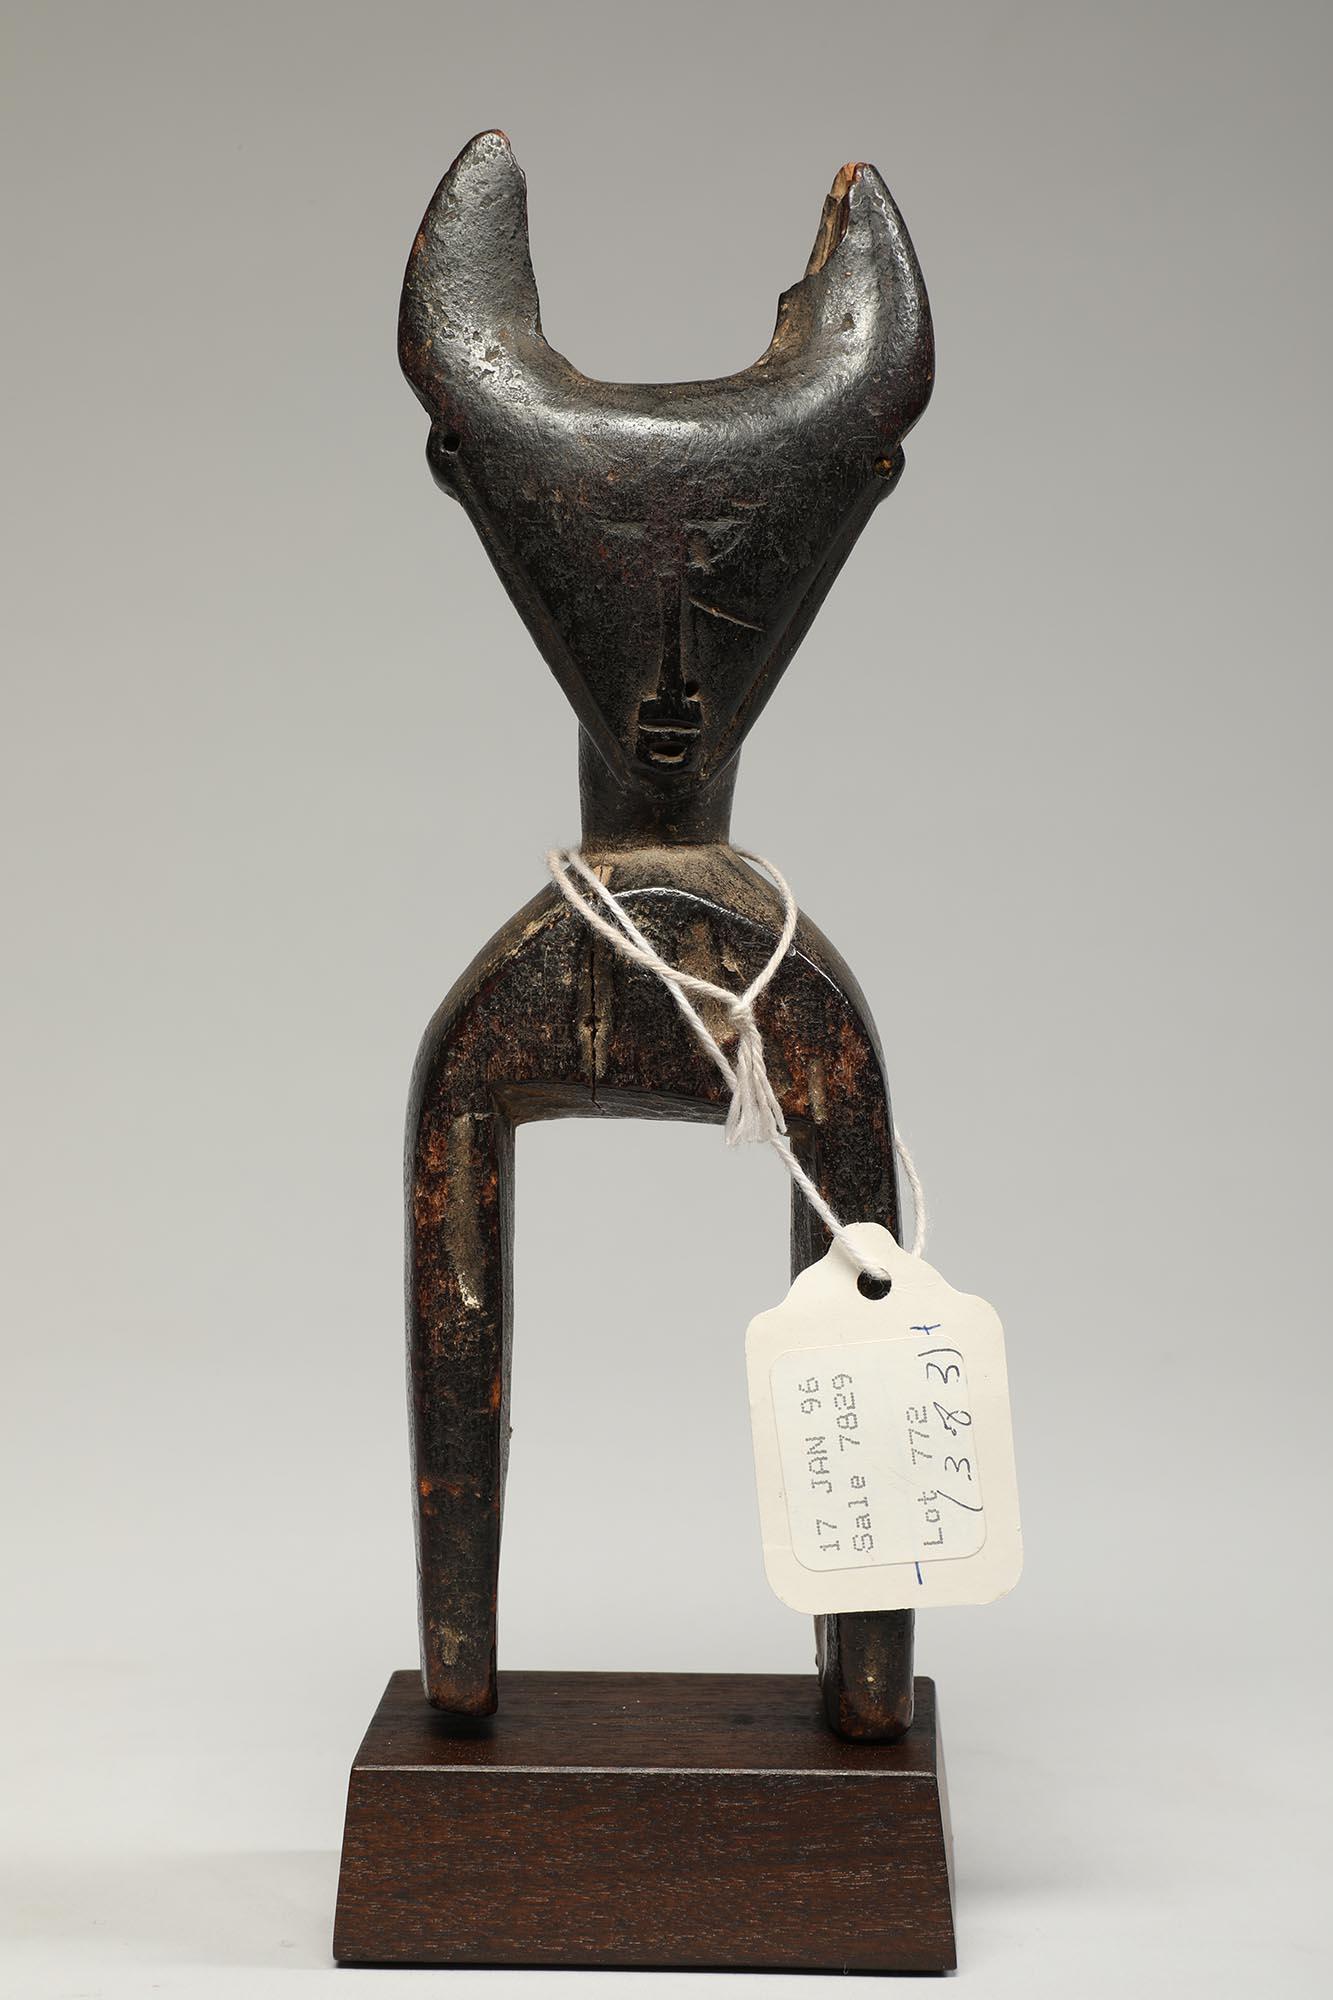 Finely carved wood weaving heddle pulley from the Djimini people in Cote d'Ivoire, Africa. With a sublime subtle carved face representing a human/ antelope or bush cow. Deep patina and heavy wear from traditional tribal use. Ex private collection